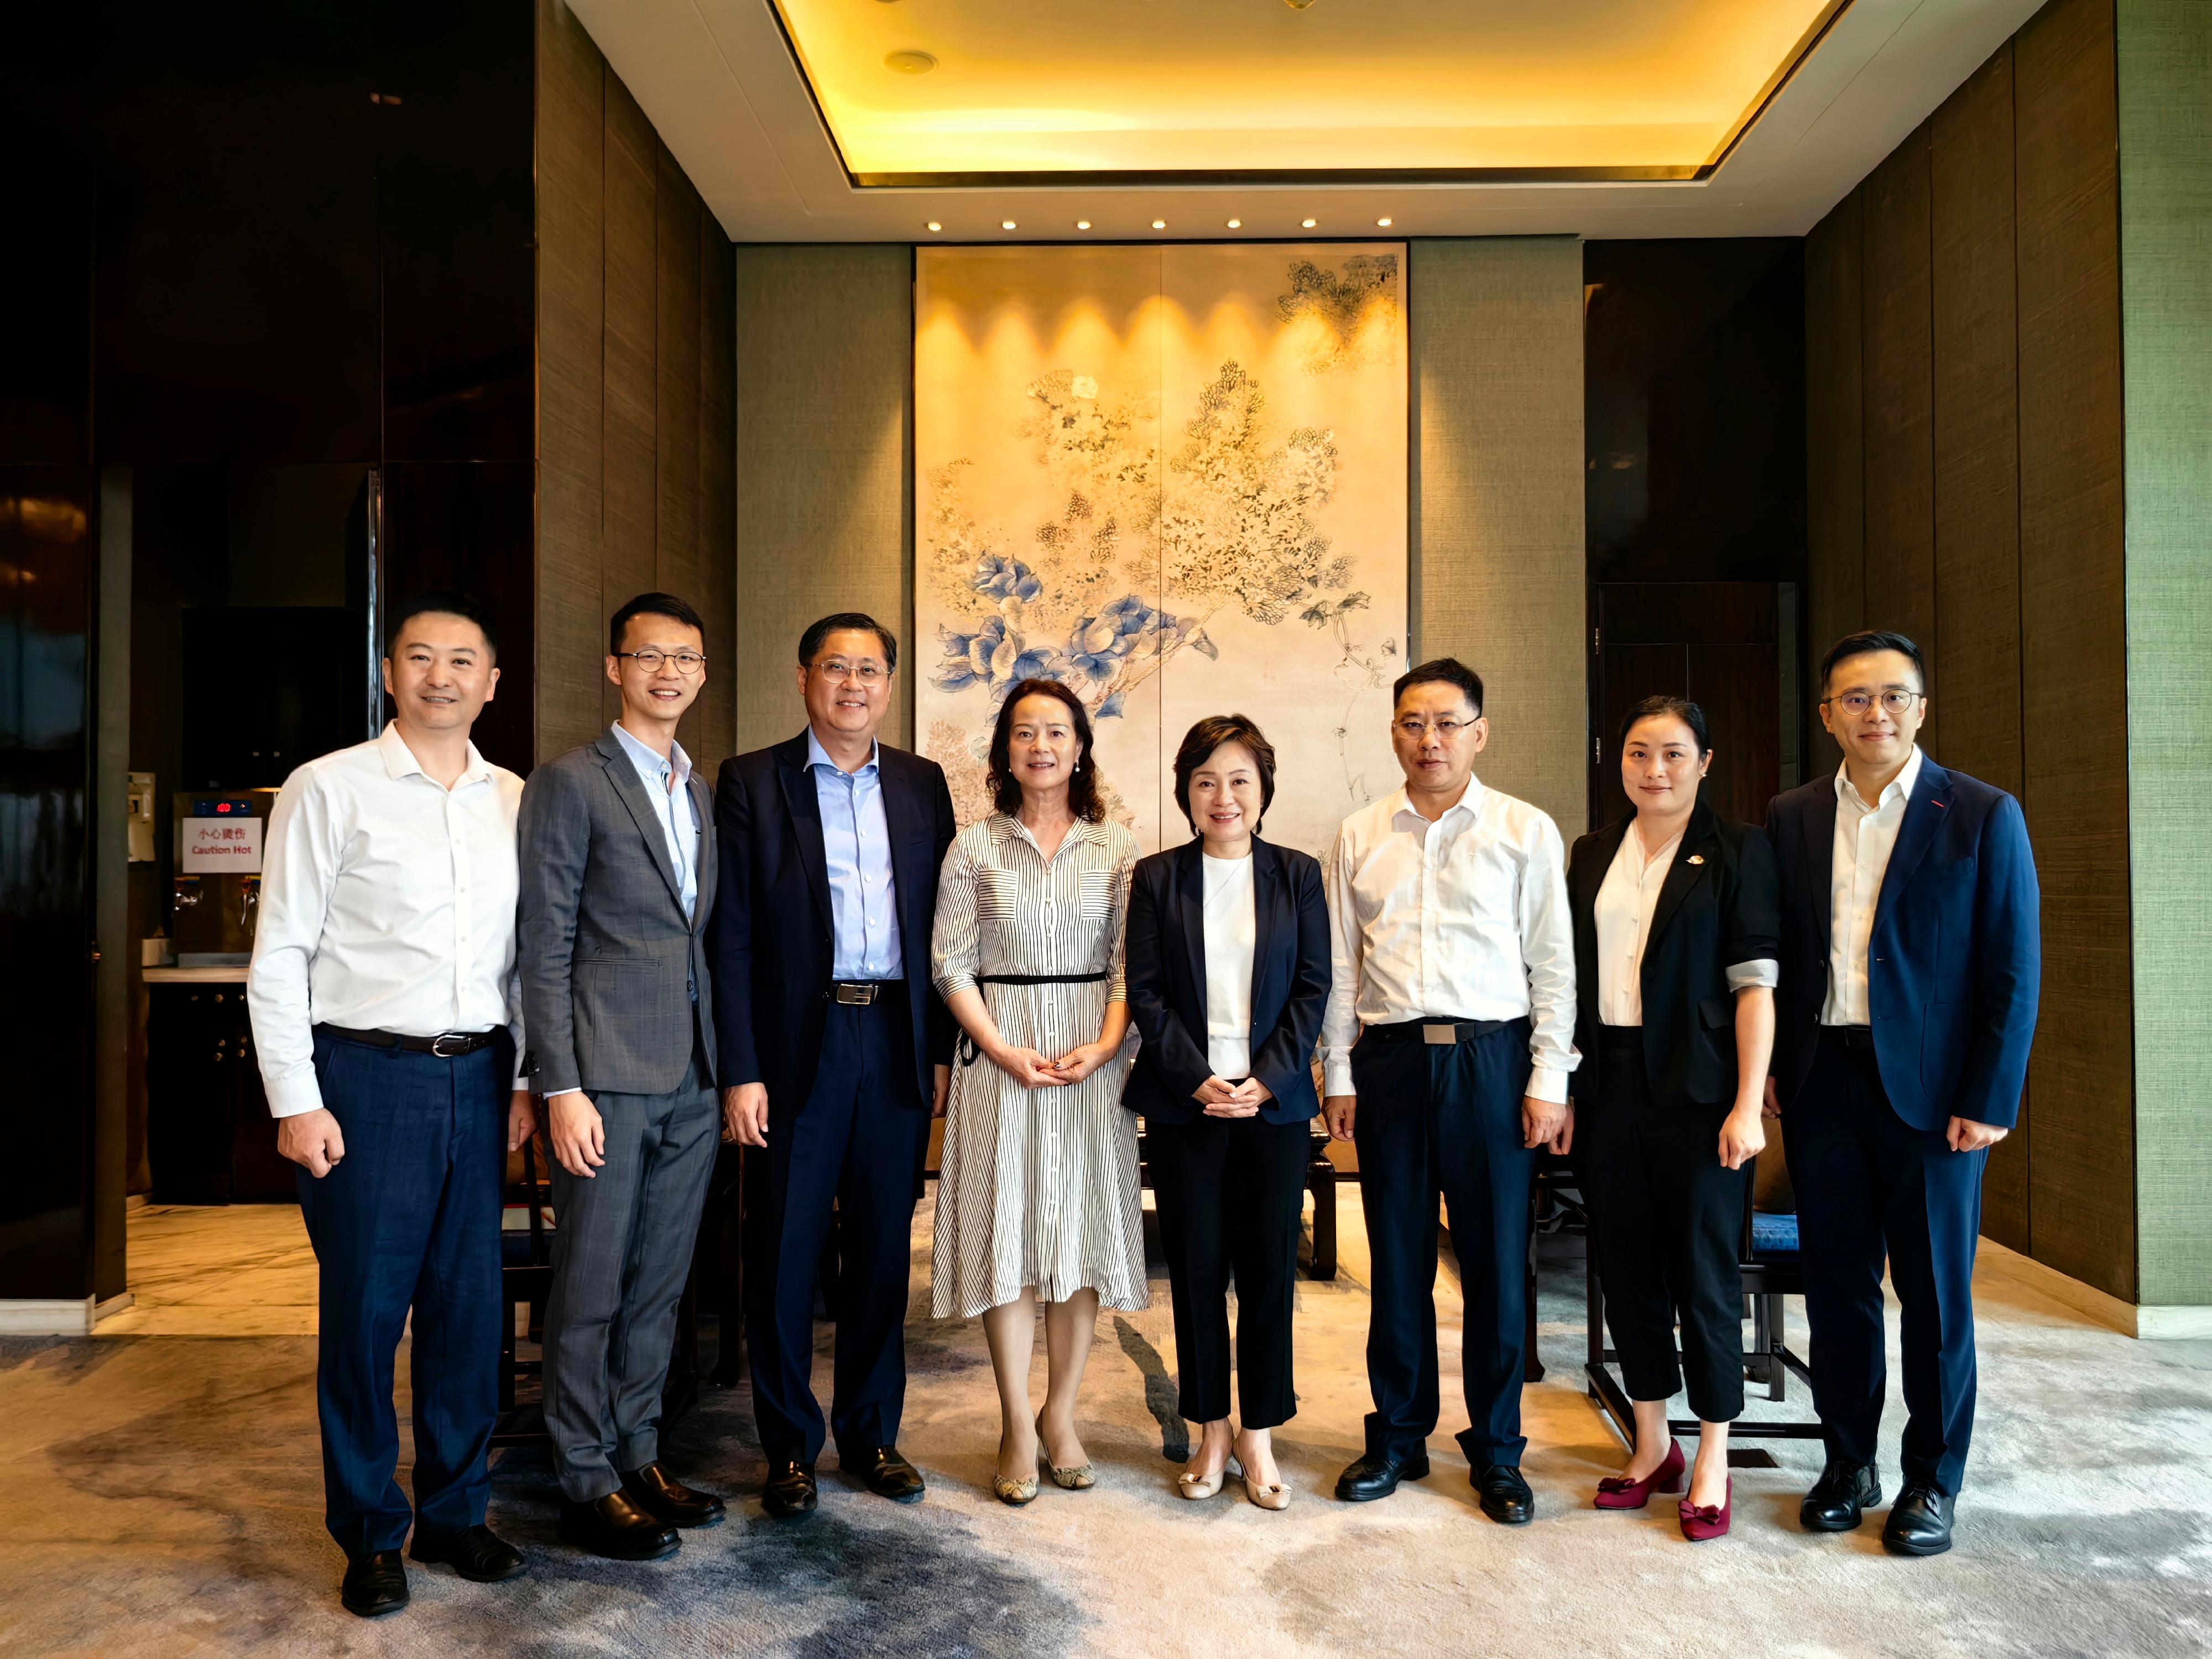 The Secretary for Education, Dr Choi Yuk-lin, visited Wuhan on September 20. Photo shows Dr Choi (fourth right) with the Director-General of the Hong Kong and Macao Affairs Office of the Hubei Provincial People's Government, Ms Zhang Xiaomei (fourth left), after a meeting.